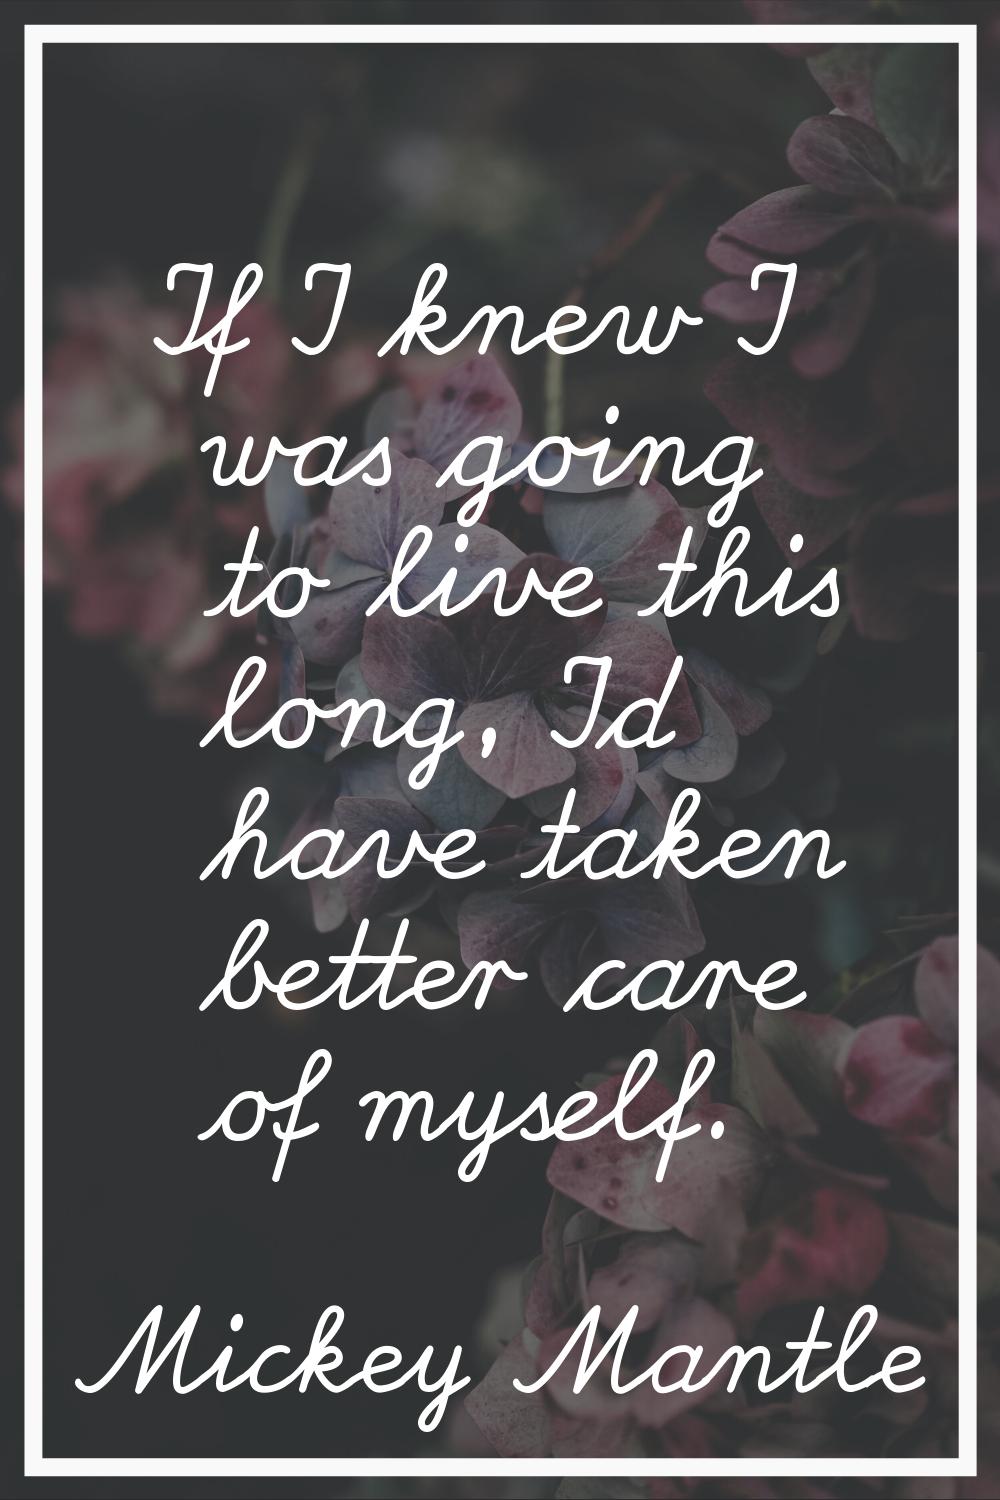 If I knew I was going to live this long, I'd have taken better care of myself.